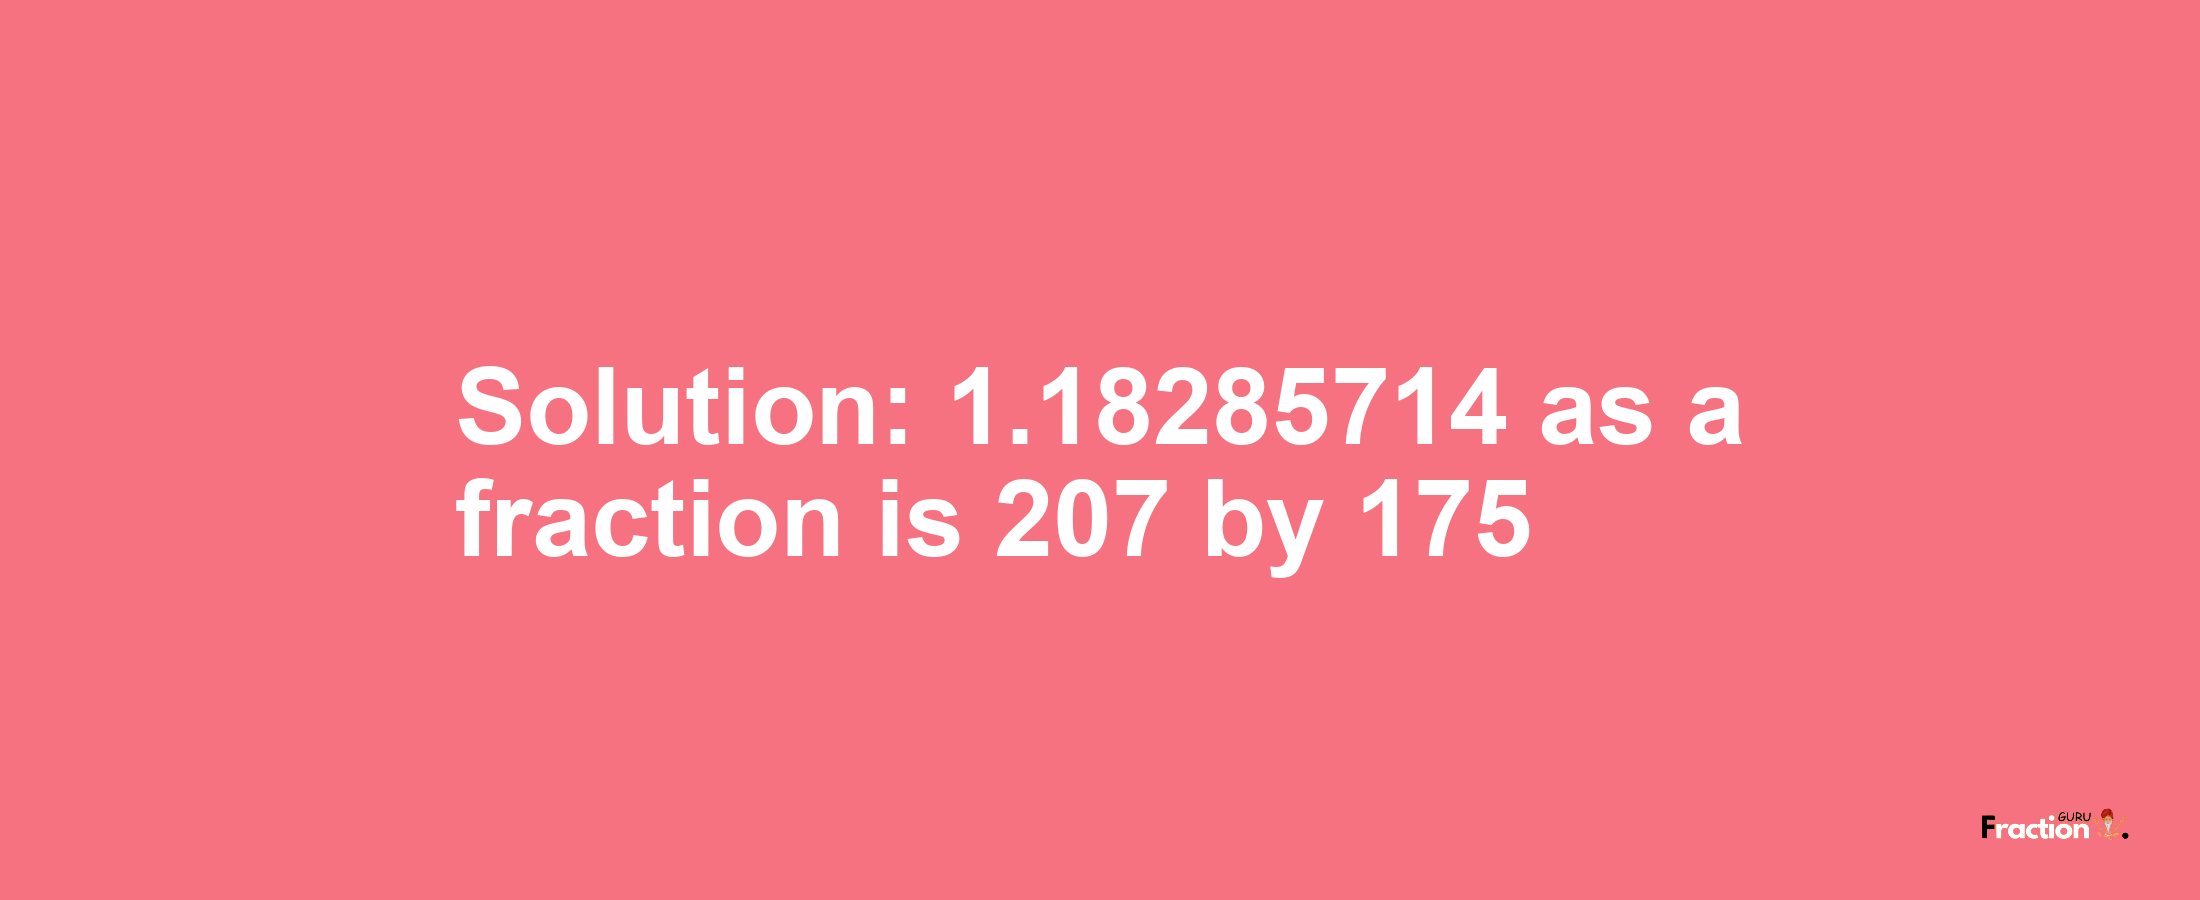 Solution:1.18285714 as a fraction is 207/175